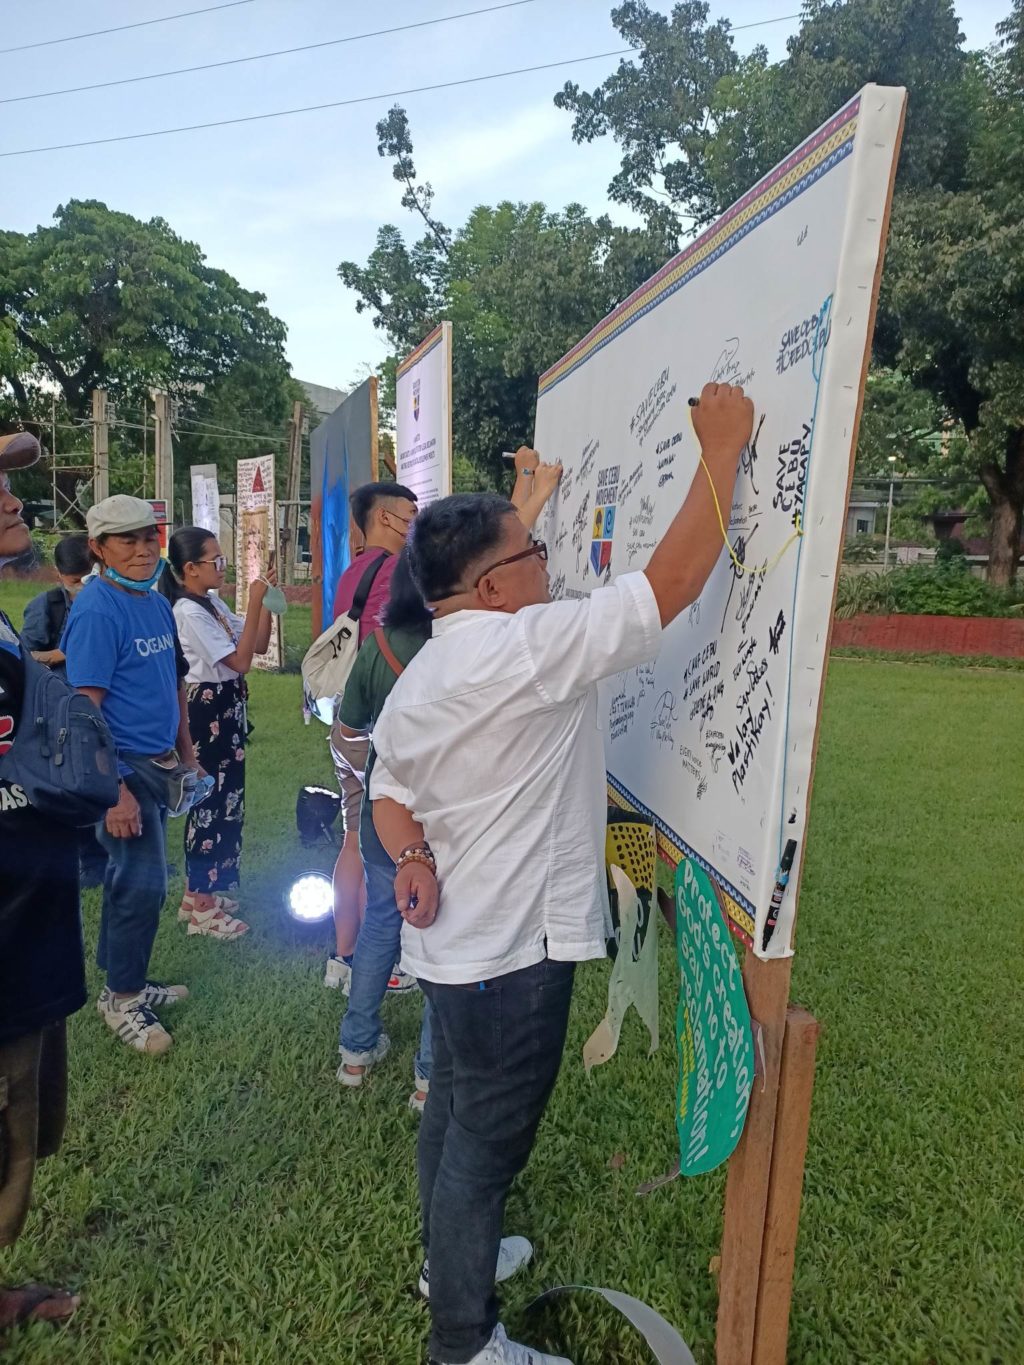 Save Cebu Movement launched to oppose reclamation projects, incineration